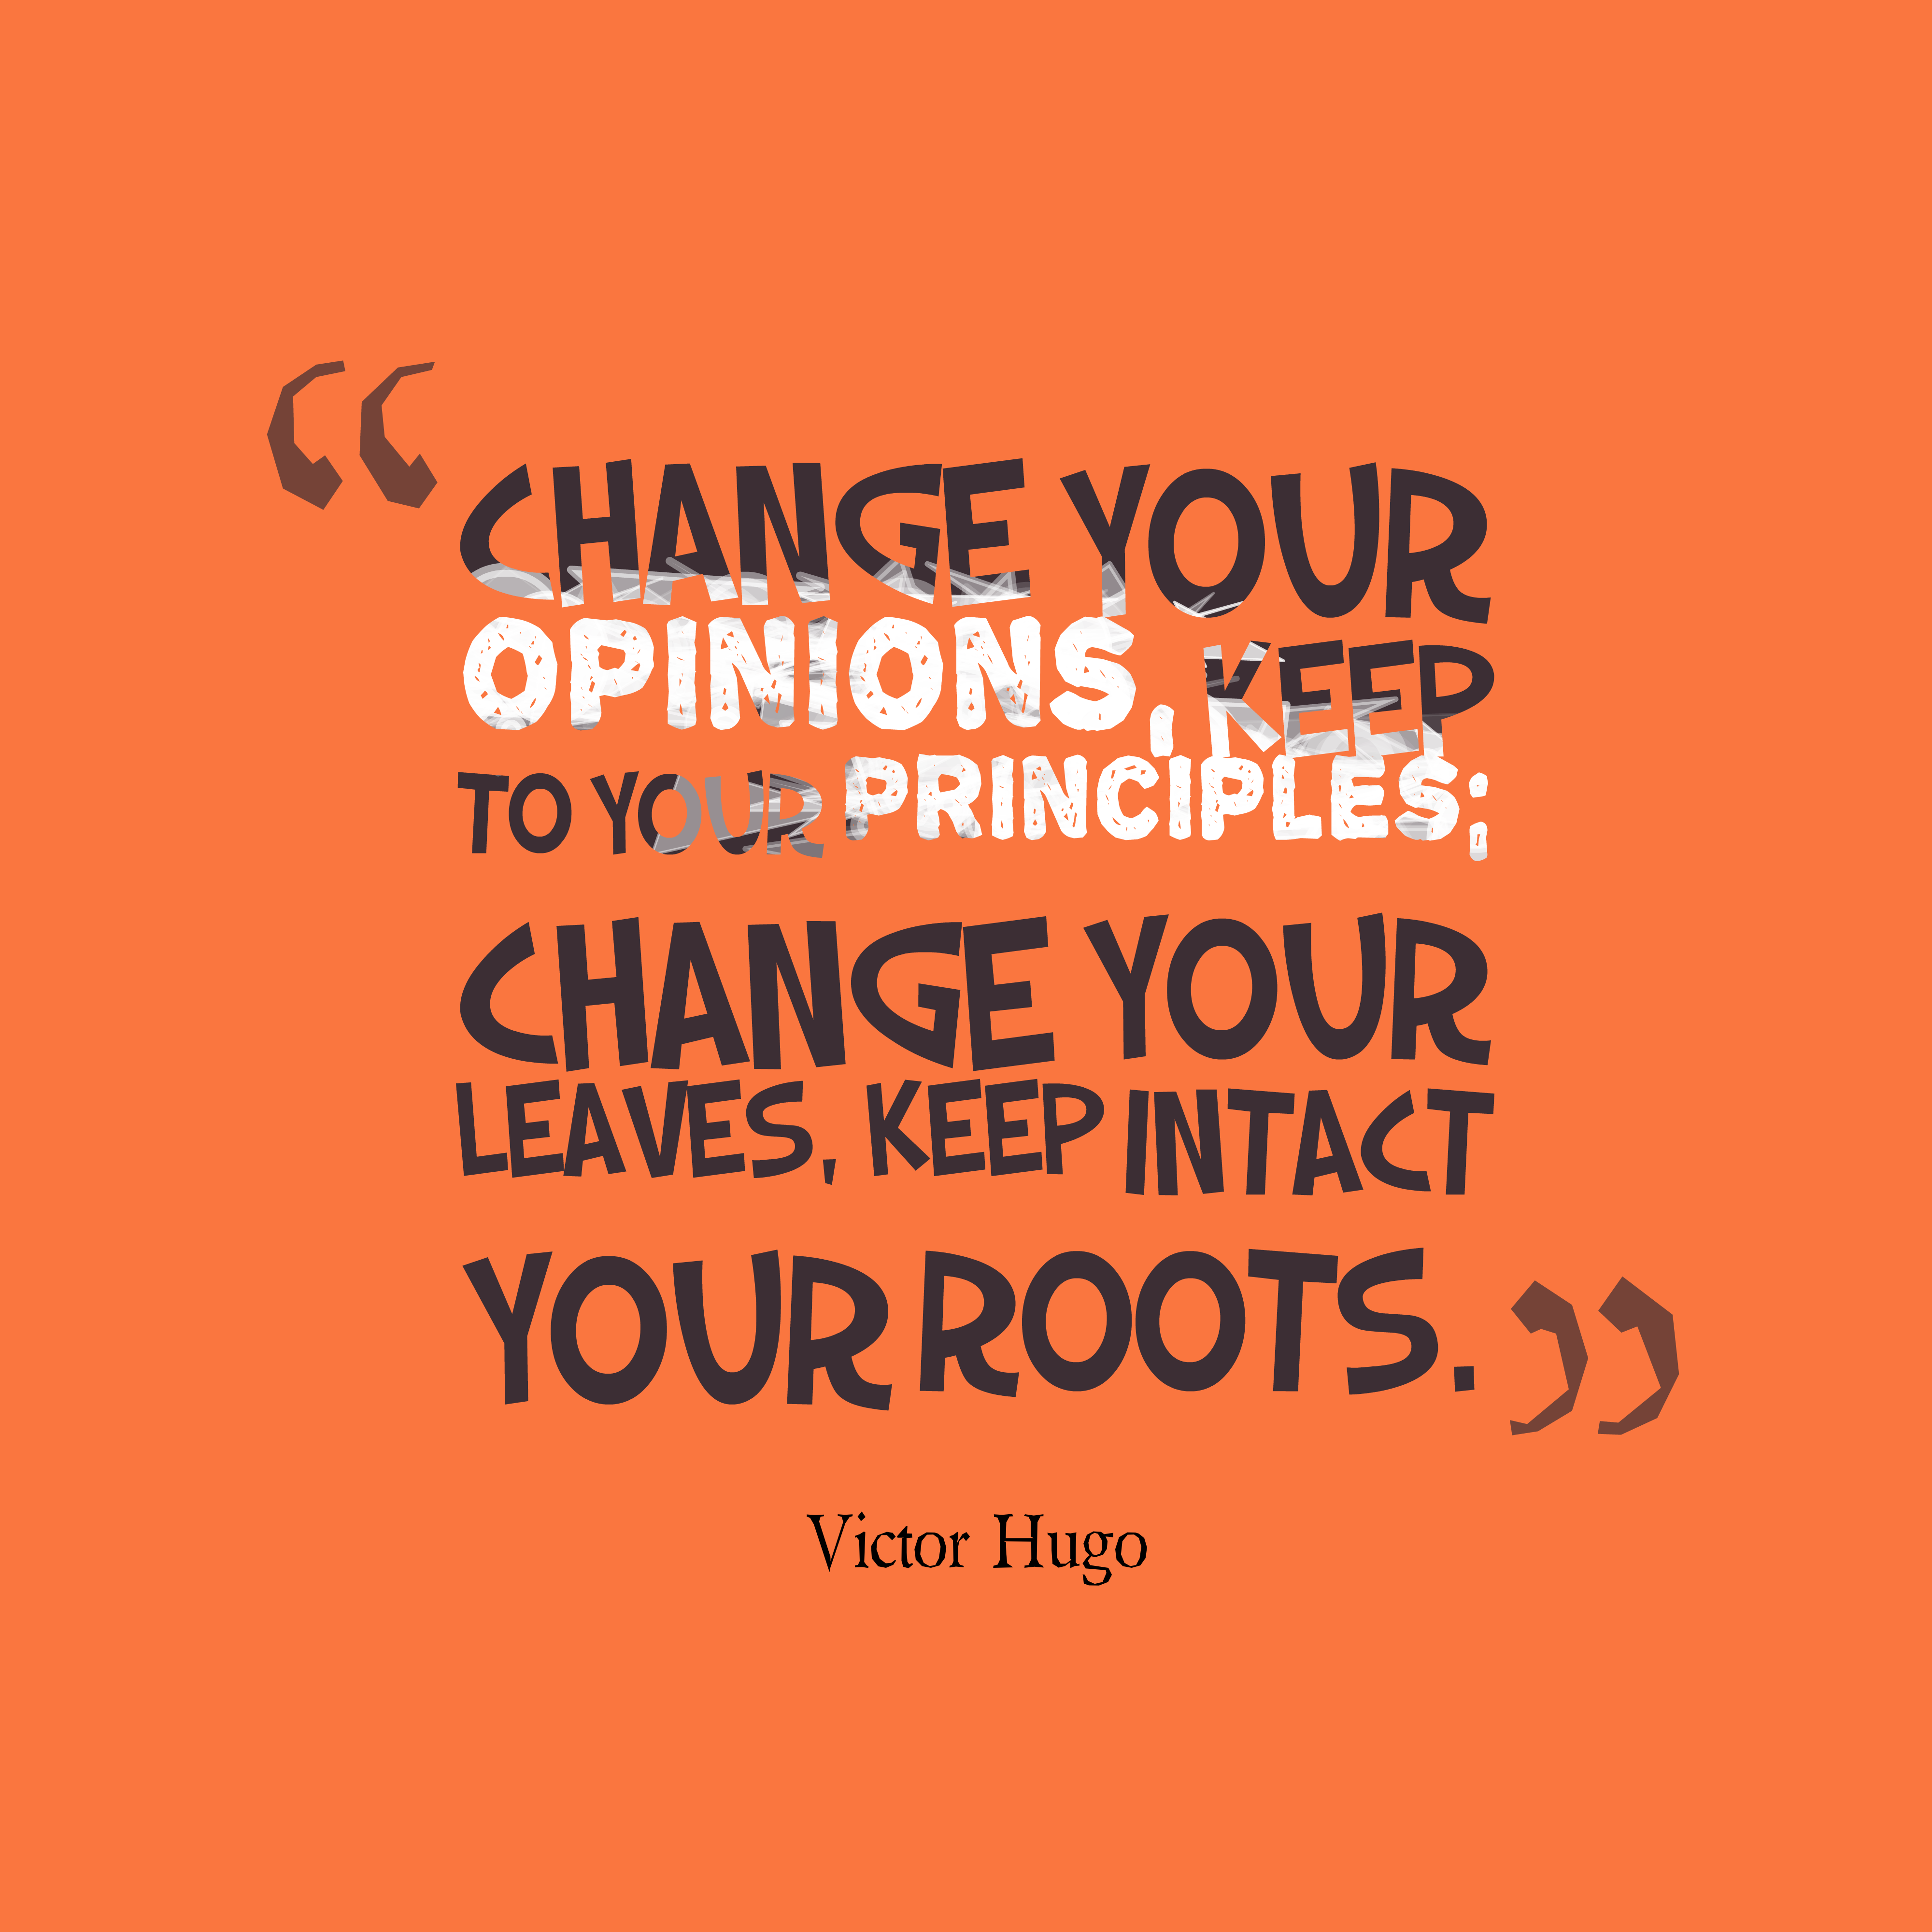 Change your opinions, keep to your principles_ change  your leaves, keep intact your roots. Victor Hugo